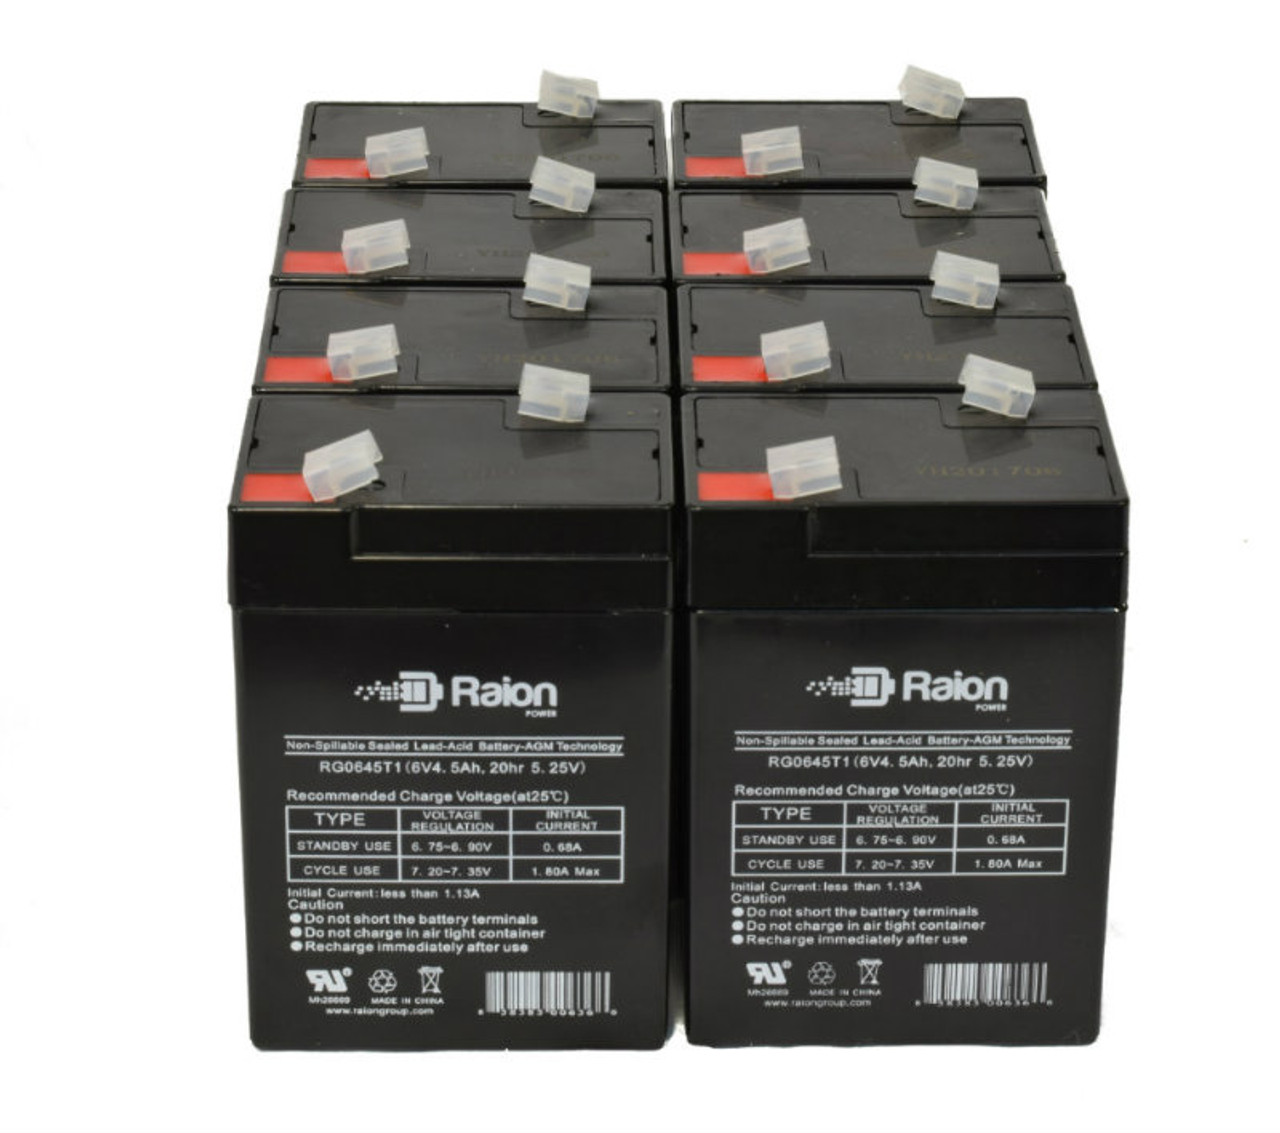 Raion Power 6 Volt 4.5Ah RG0645T1 Replacement Battery for National C12C - 8 Pack